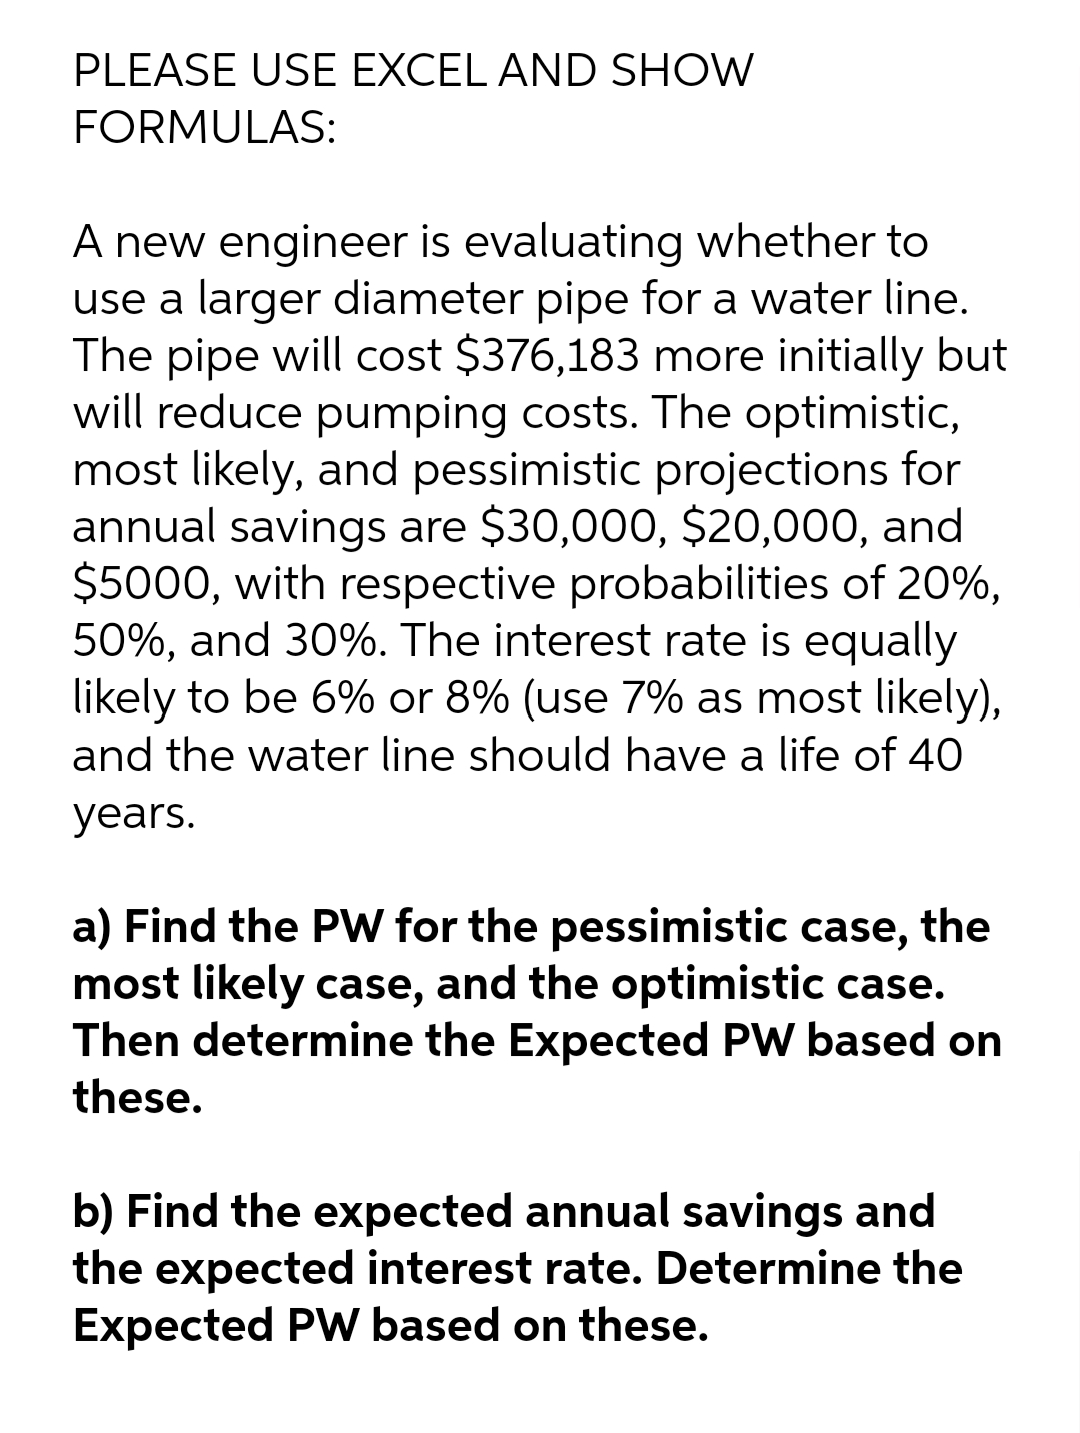 PLEASE USE EXCEL AND SHOW
FORMULAS:
A new engineer is evaluating whether to
use a larger diameter pipe for a water line.
The pipe will cost $376,183 more initially but
will reduce pumping costs. The optimistic,
most likely, and pessimistic projections for
annual savings are $30,000, $20,000, and
$5000, with respective probabilities of 20%,
50%, and 30%. The interest rate is equally
likely to be 6% or 8% (use 7% as most likely),
and the water line should have a life of 40
years.
a) Find the PW for the pessimistic case, the
most likely case, and the optimistic case.
Then determine the Expected PW based on
these.
b) Find the expected annual savings and
the expected interest rate. Determine the
Expected PW based on these.
